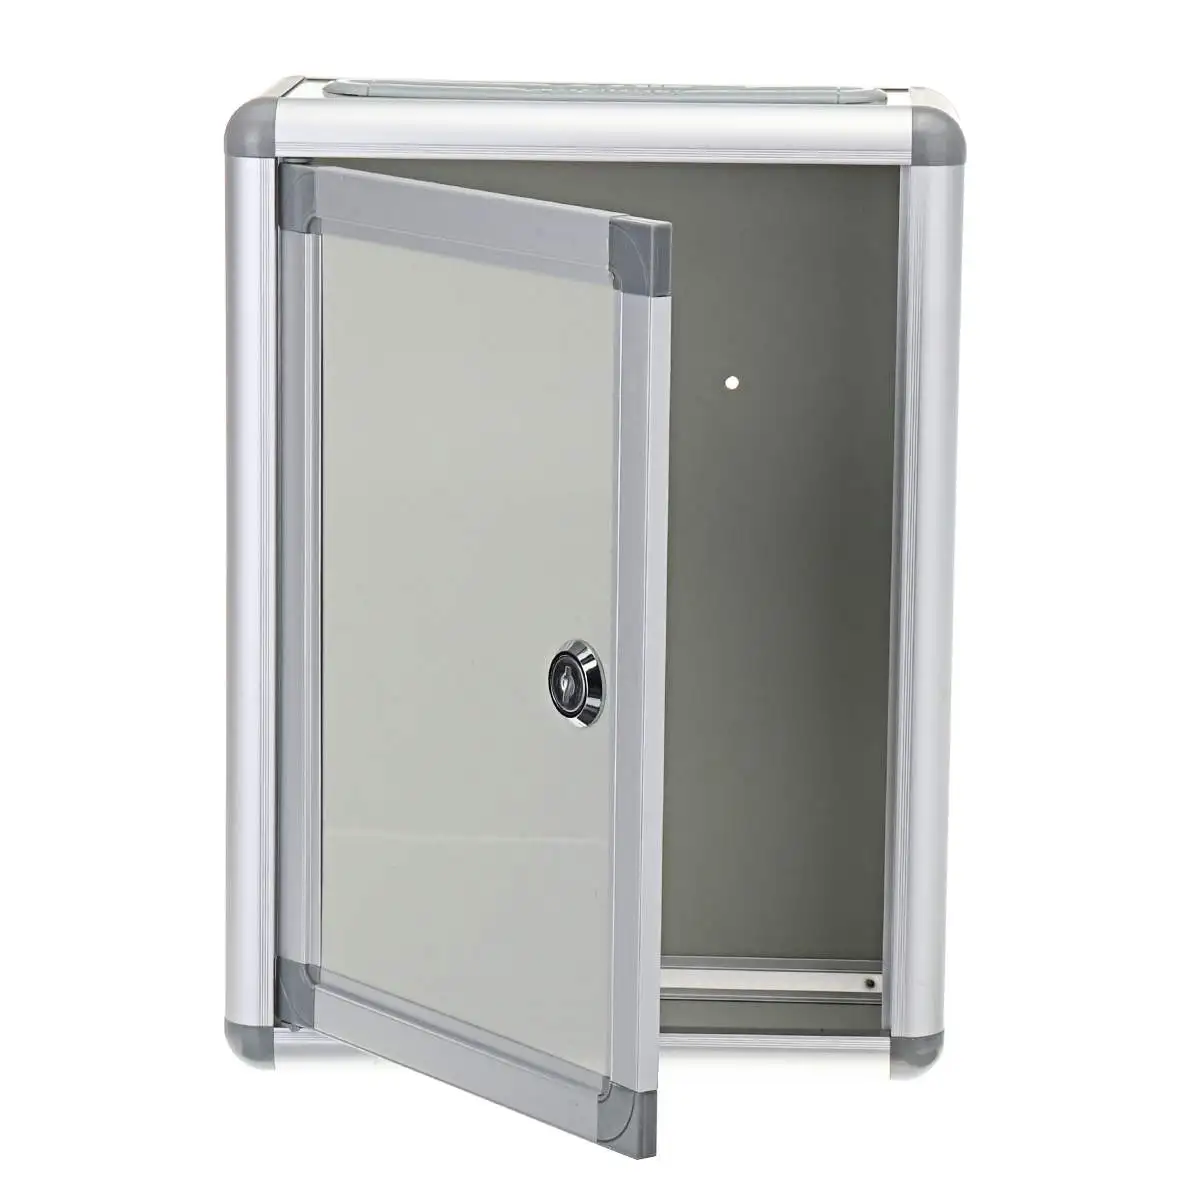 

11 Inch Aluminum Alloy Wall Mounted Mail Letter Post Box Suggestion Newspaper Mailbox Outdoor Lockable Mailboxes For Garden